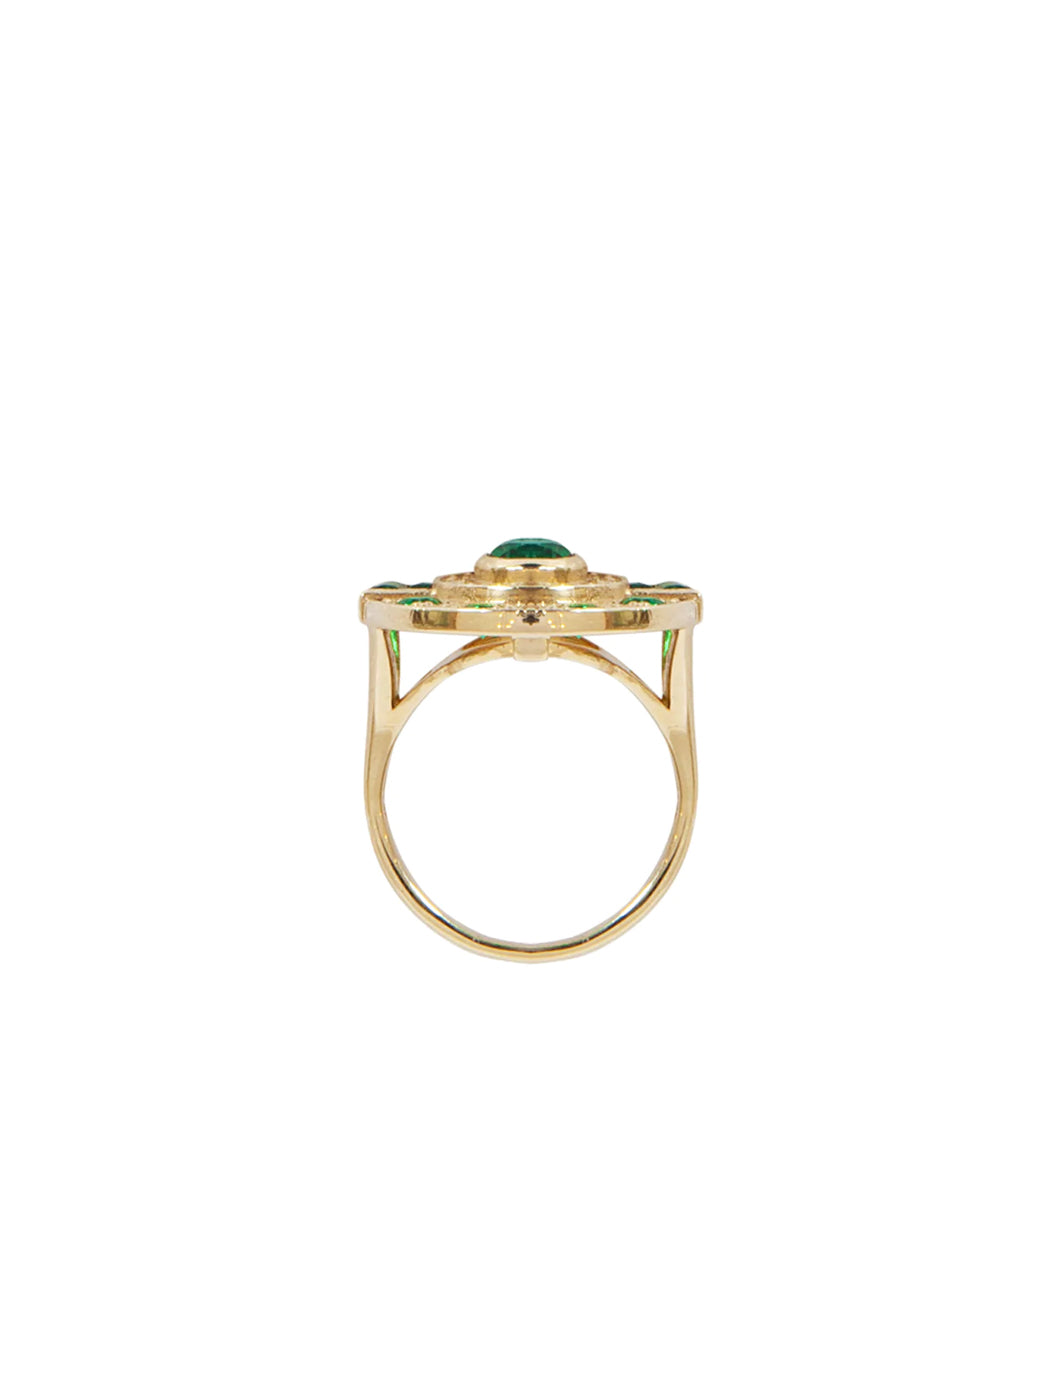 Gold Aztec Ring Emerald Side View